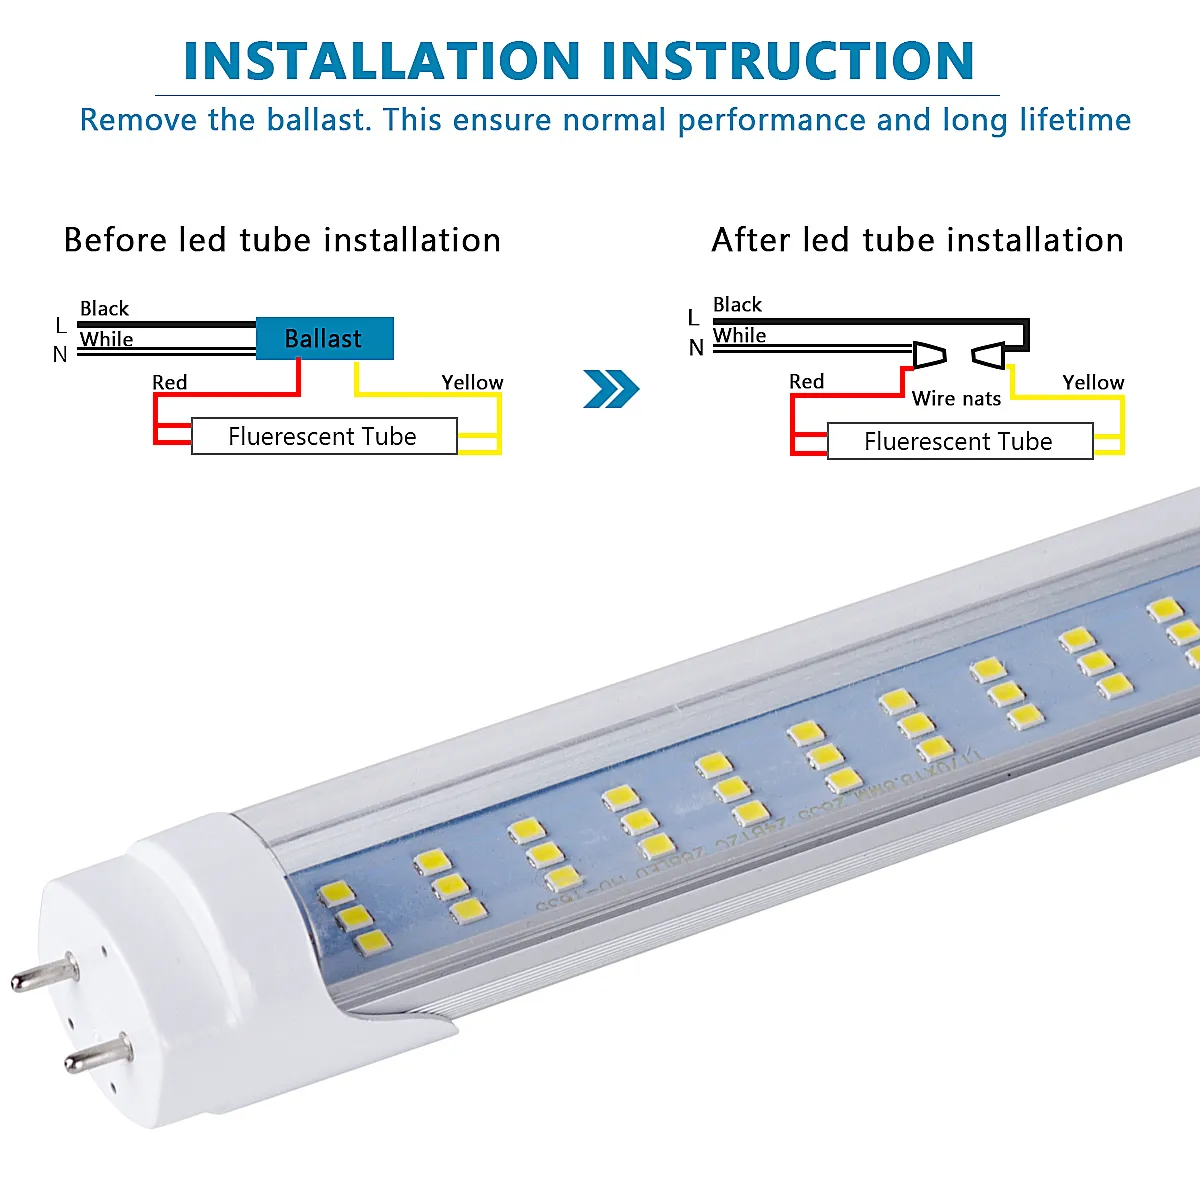 LED Light Tubes 4FT 60W ,Flat 3 Row LED Chips,LED Replacement Bulbs for 4 Foot Fluorescent Fixture,Warehouse Shop Light